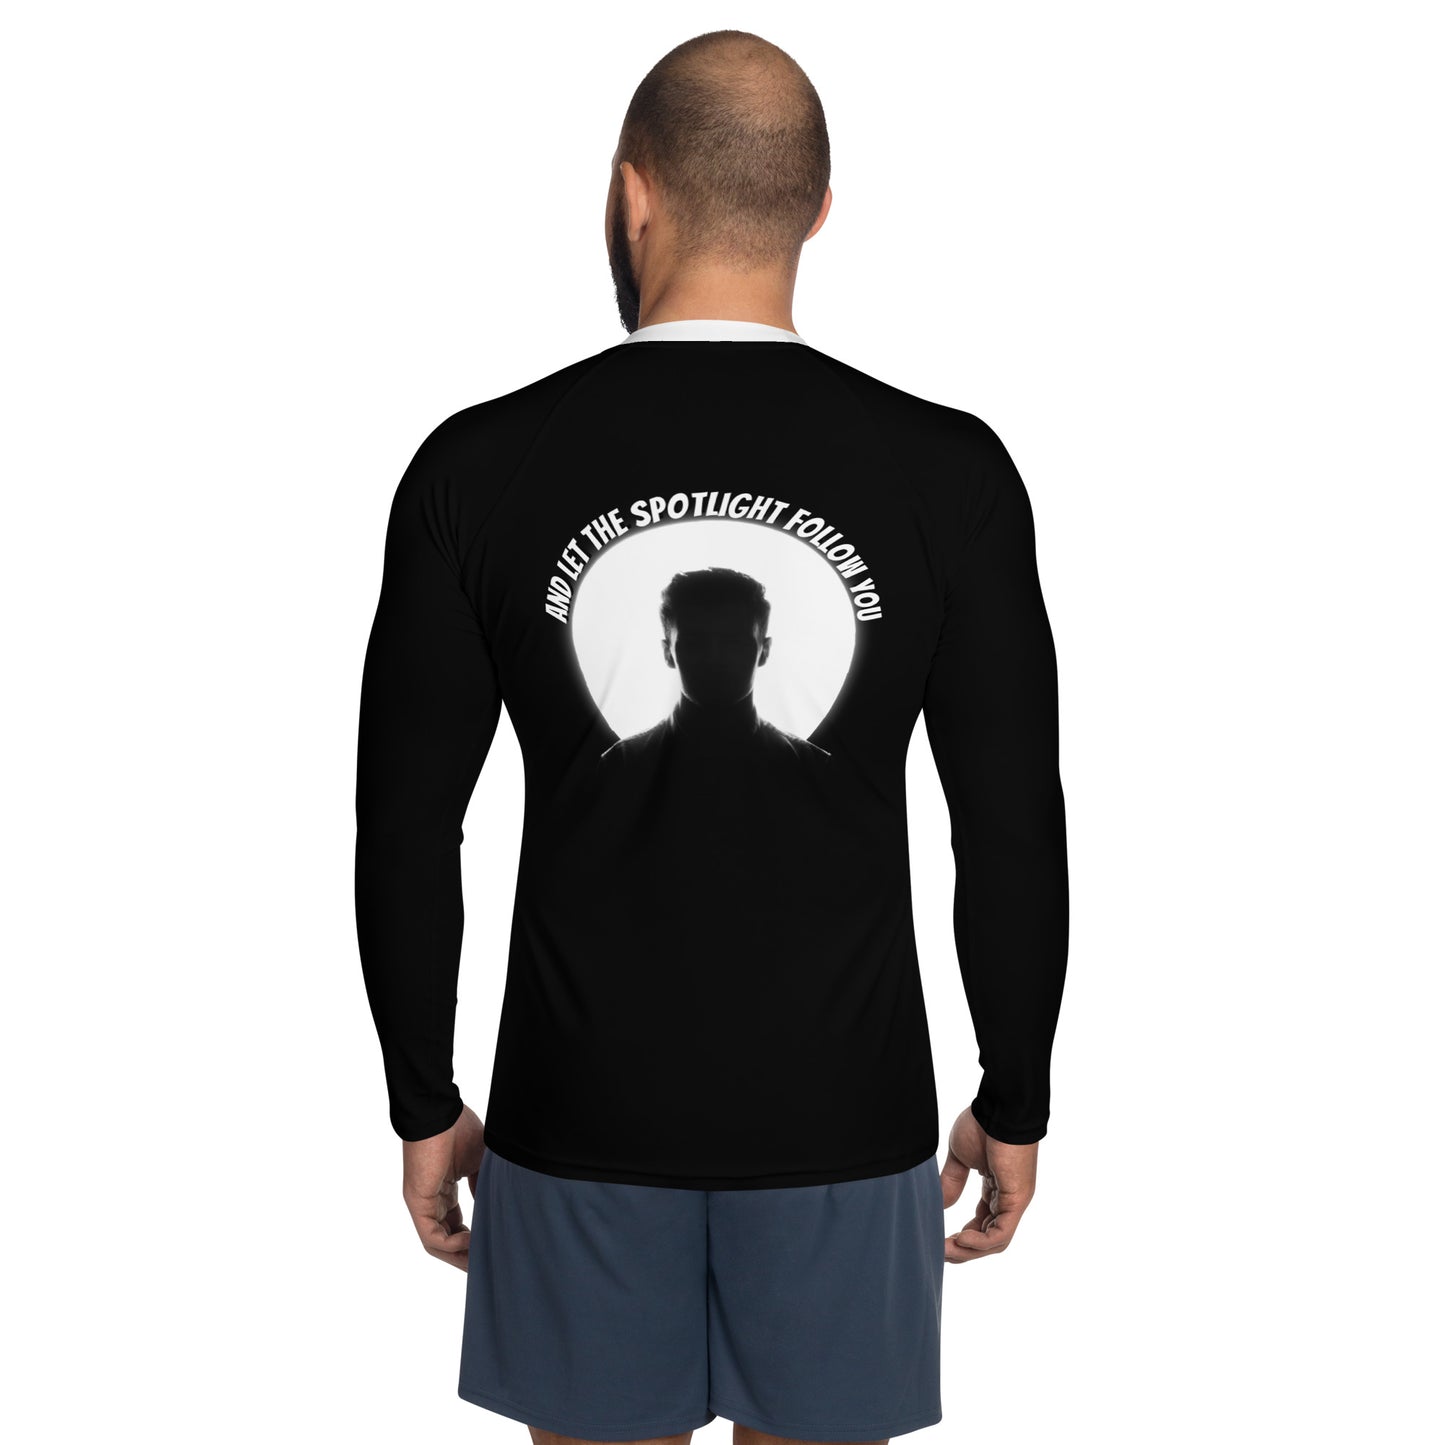 A confident man wearing the LBS Motivate Merch Men's Rash Guard, ready to lead with his best self and set goals for success